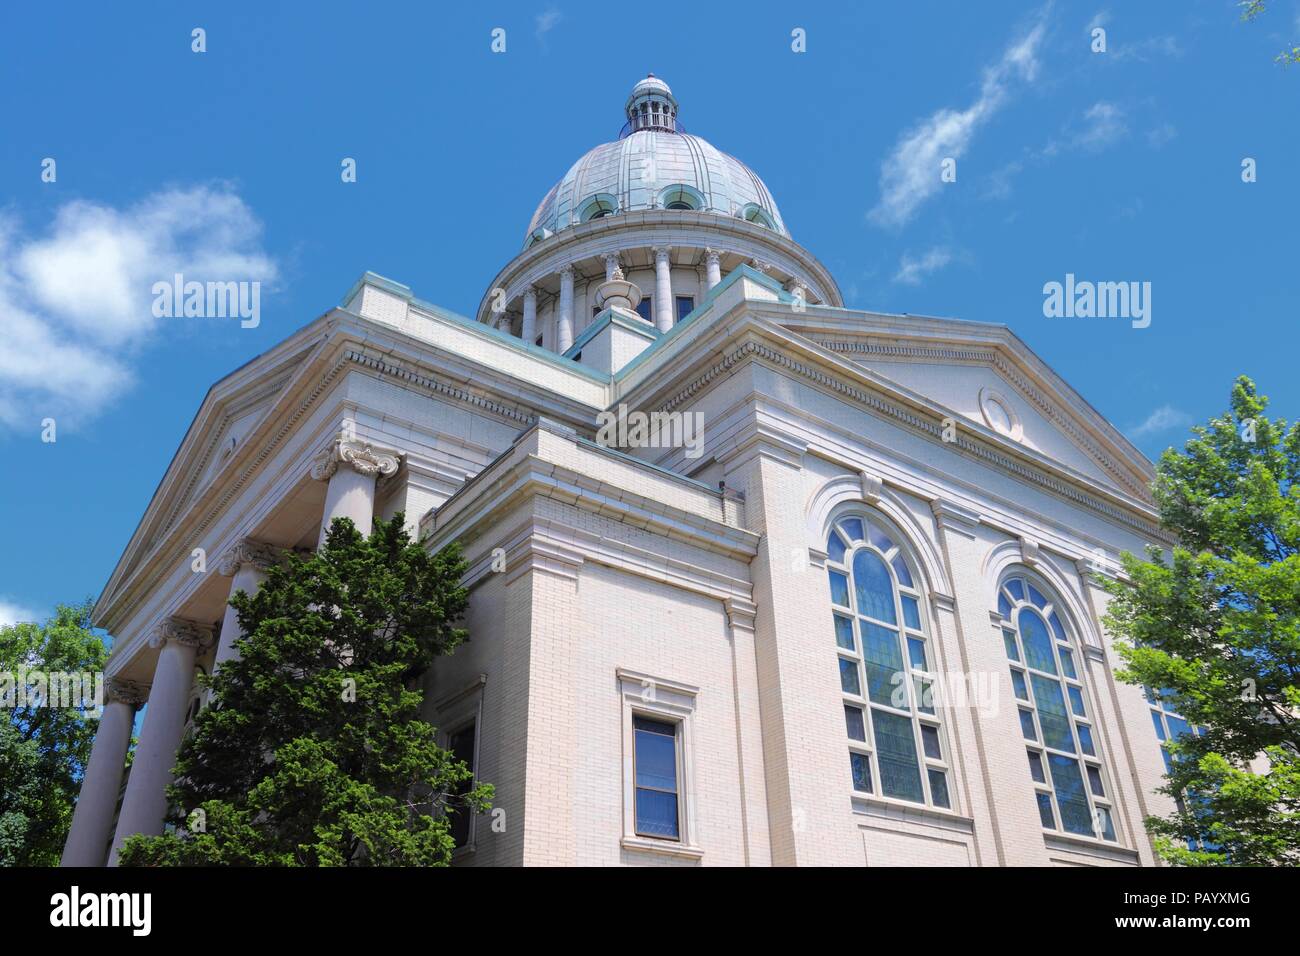 Providence, Rhode Island. City in New England region of the United States. First Church of Christ Scientist. Stock Photo